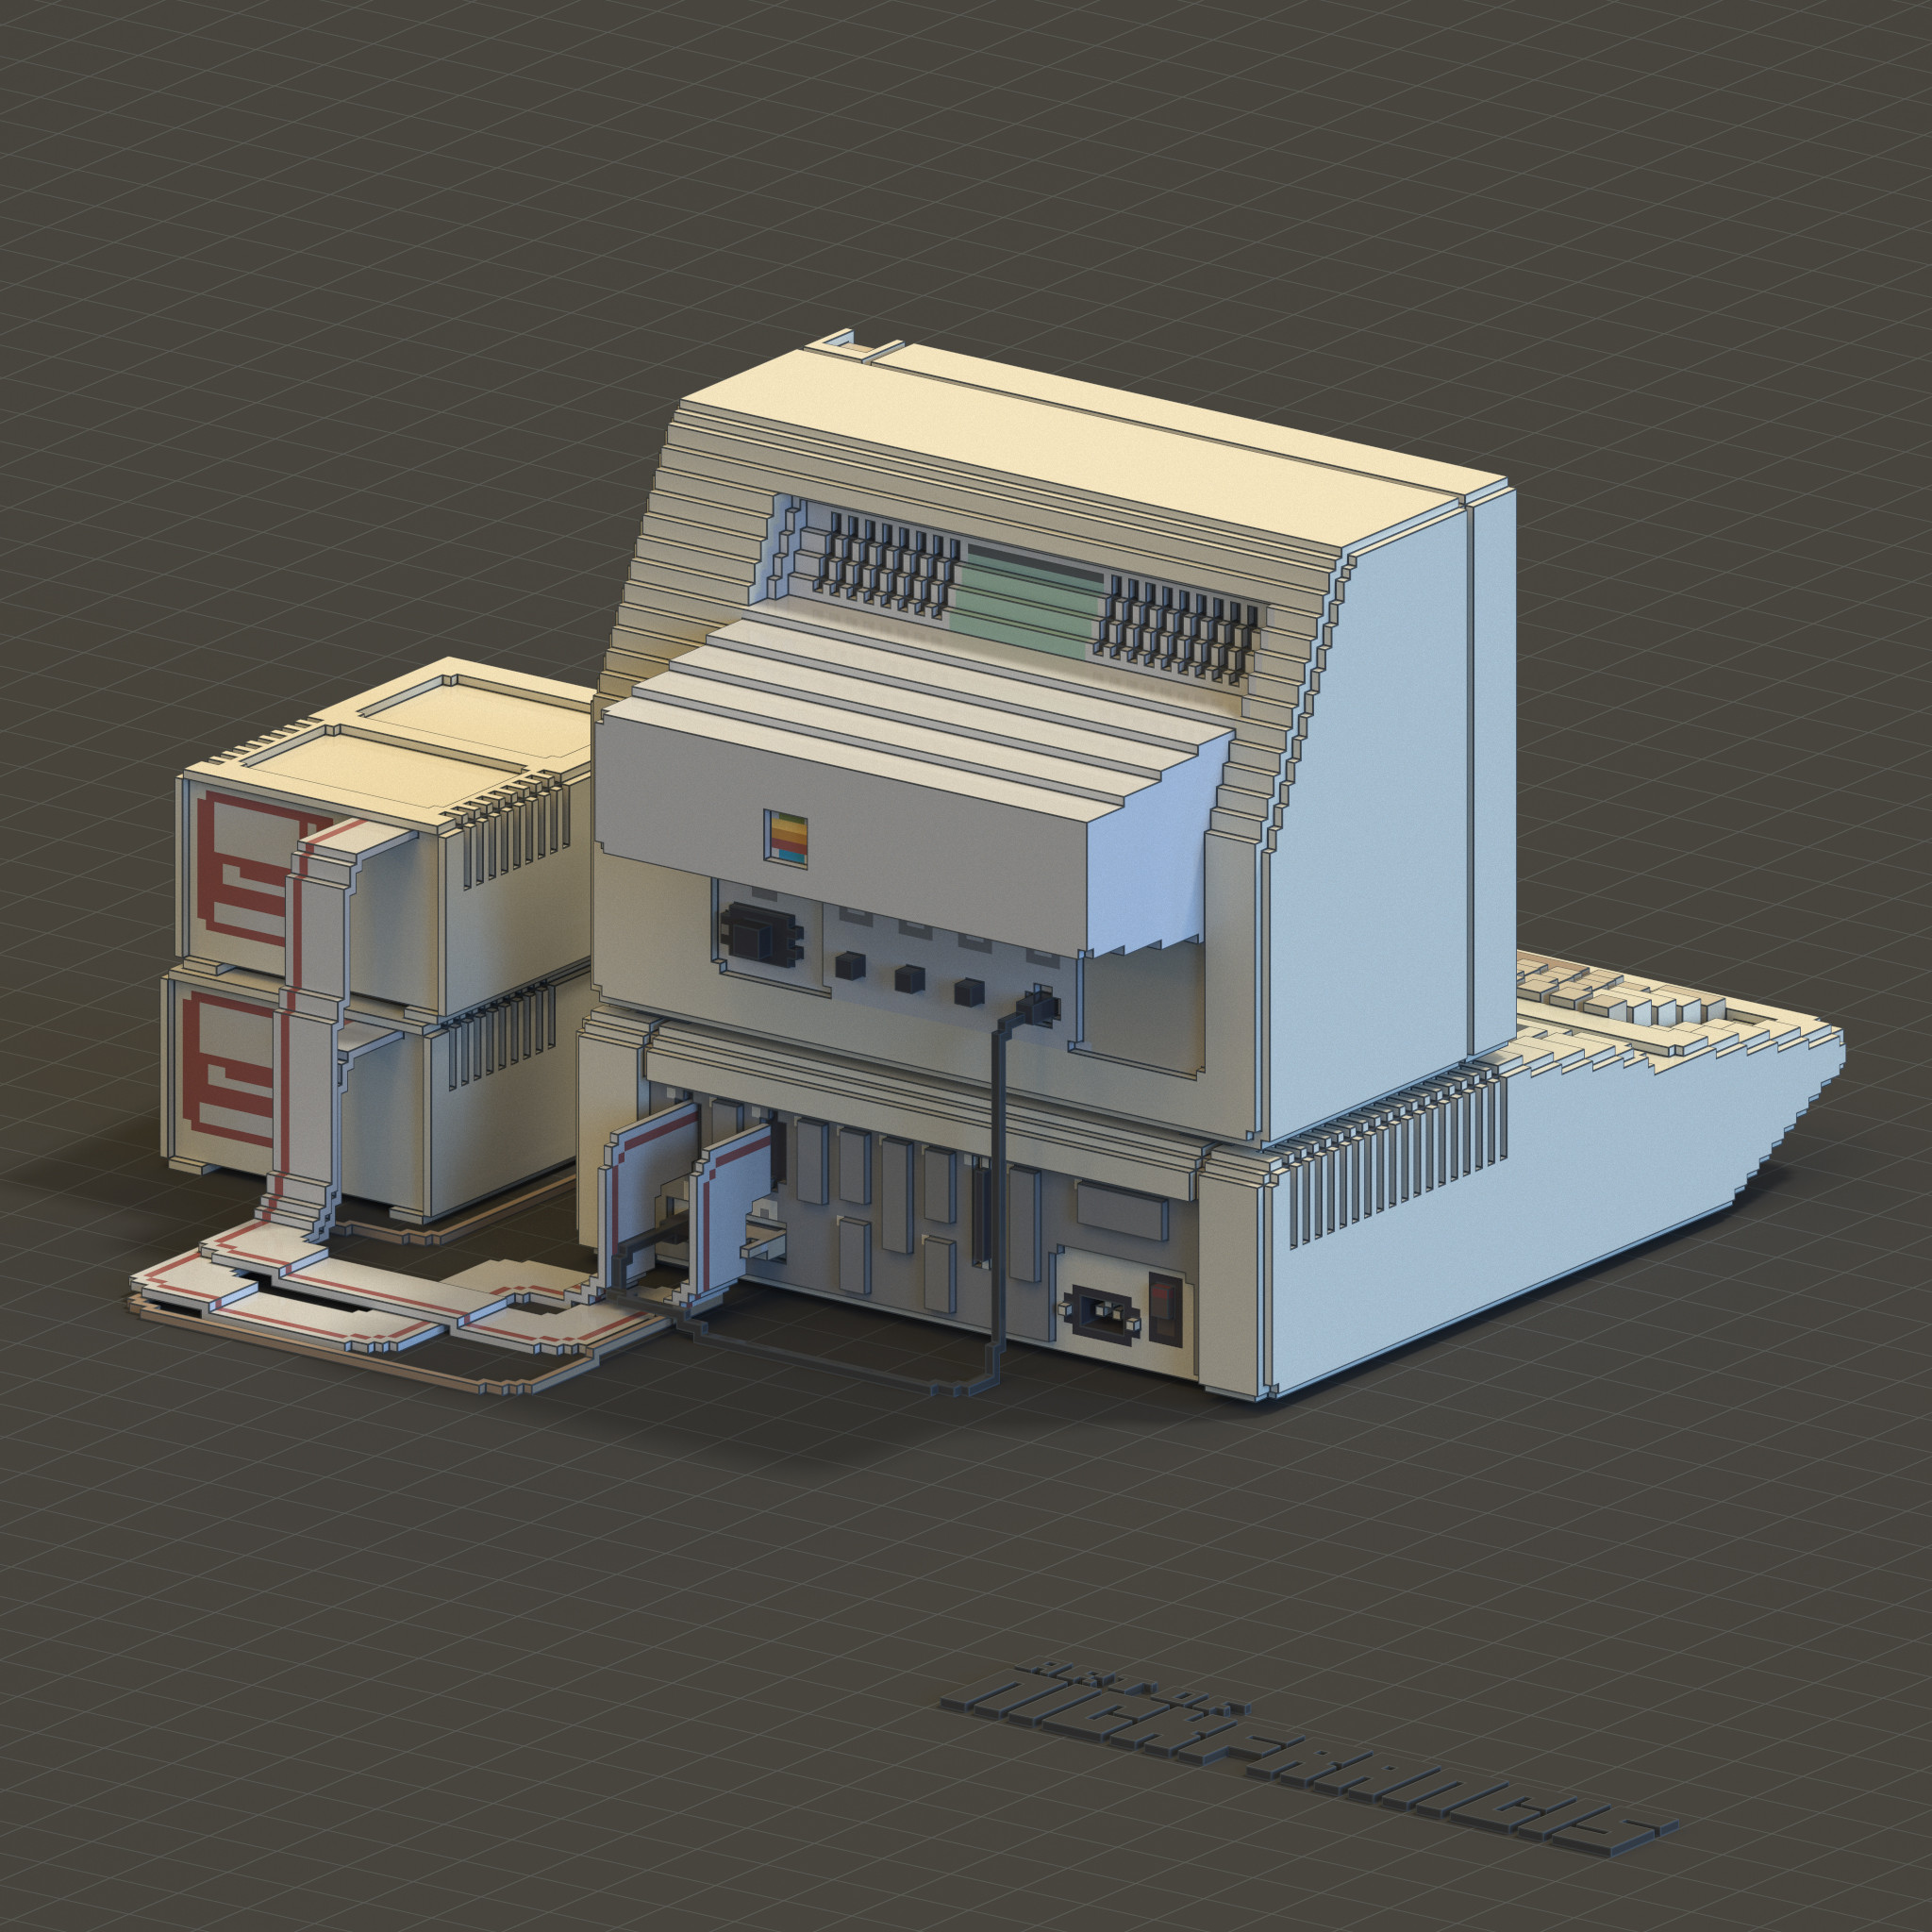 Rendering of the back of a Apple IIe workstation.